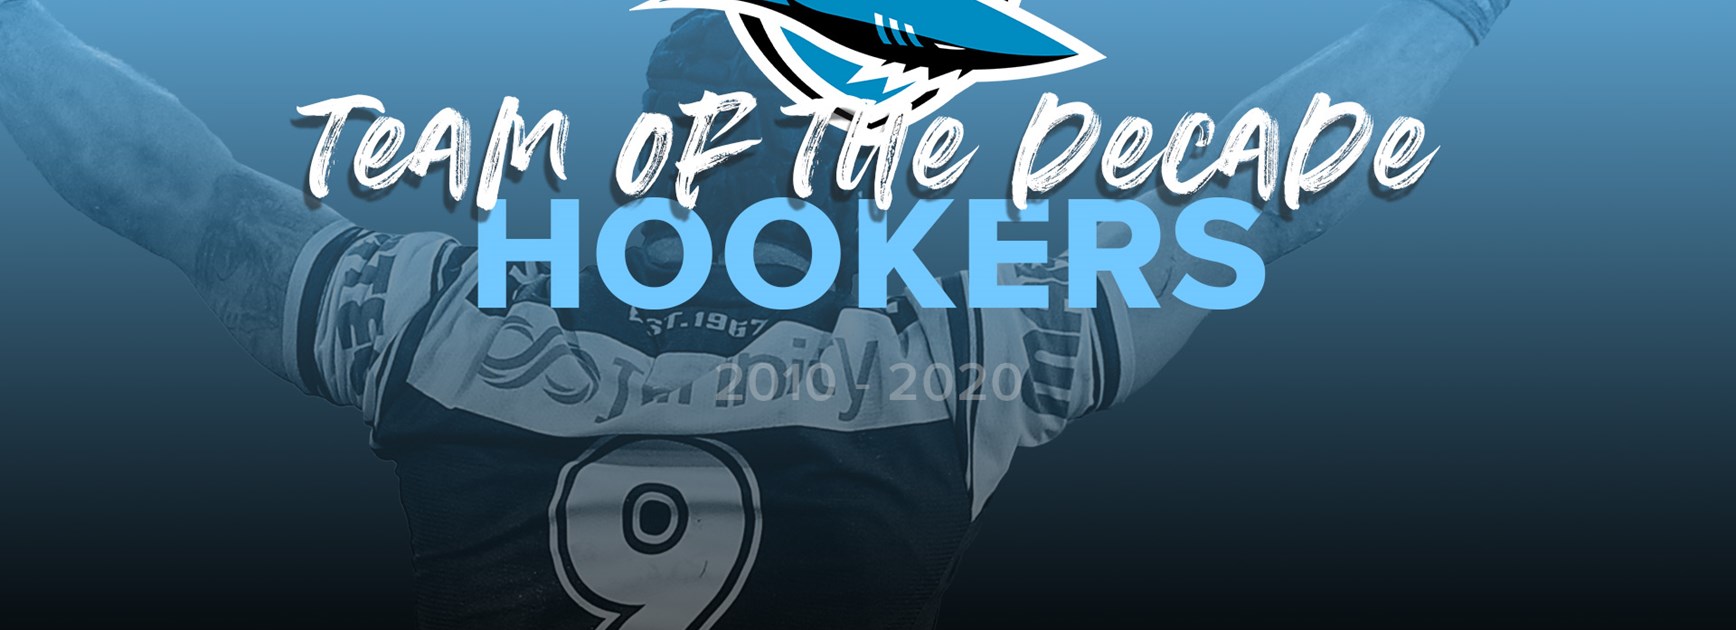 Sharks Team of the Decade – 2010-2020 – Hookers